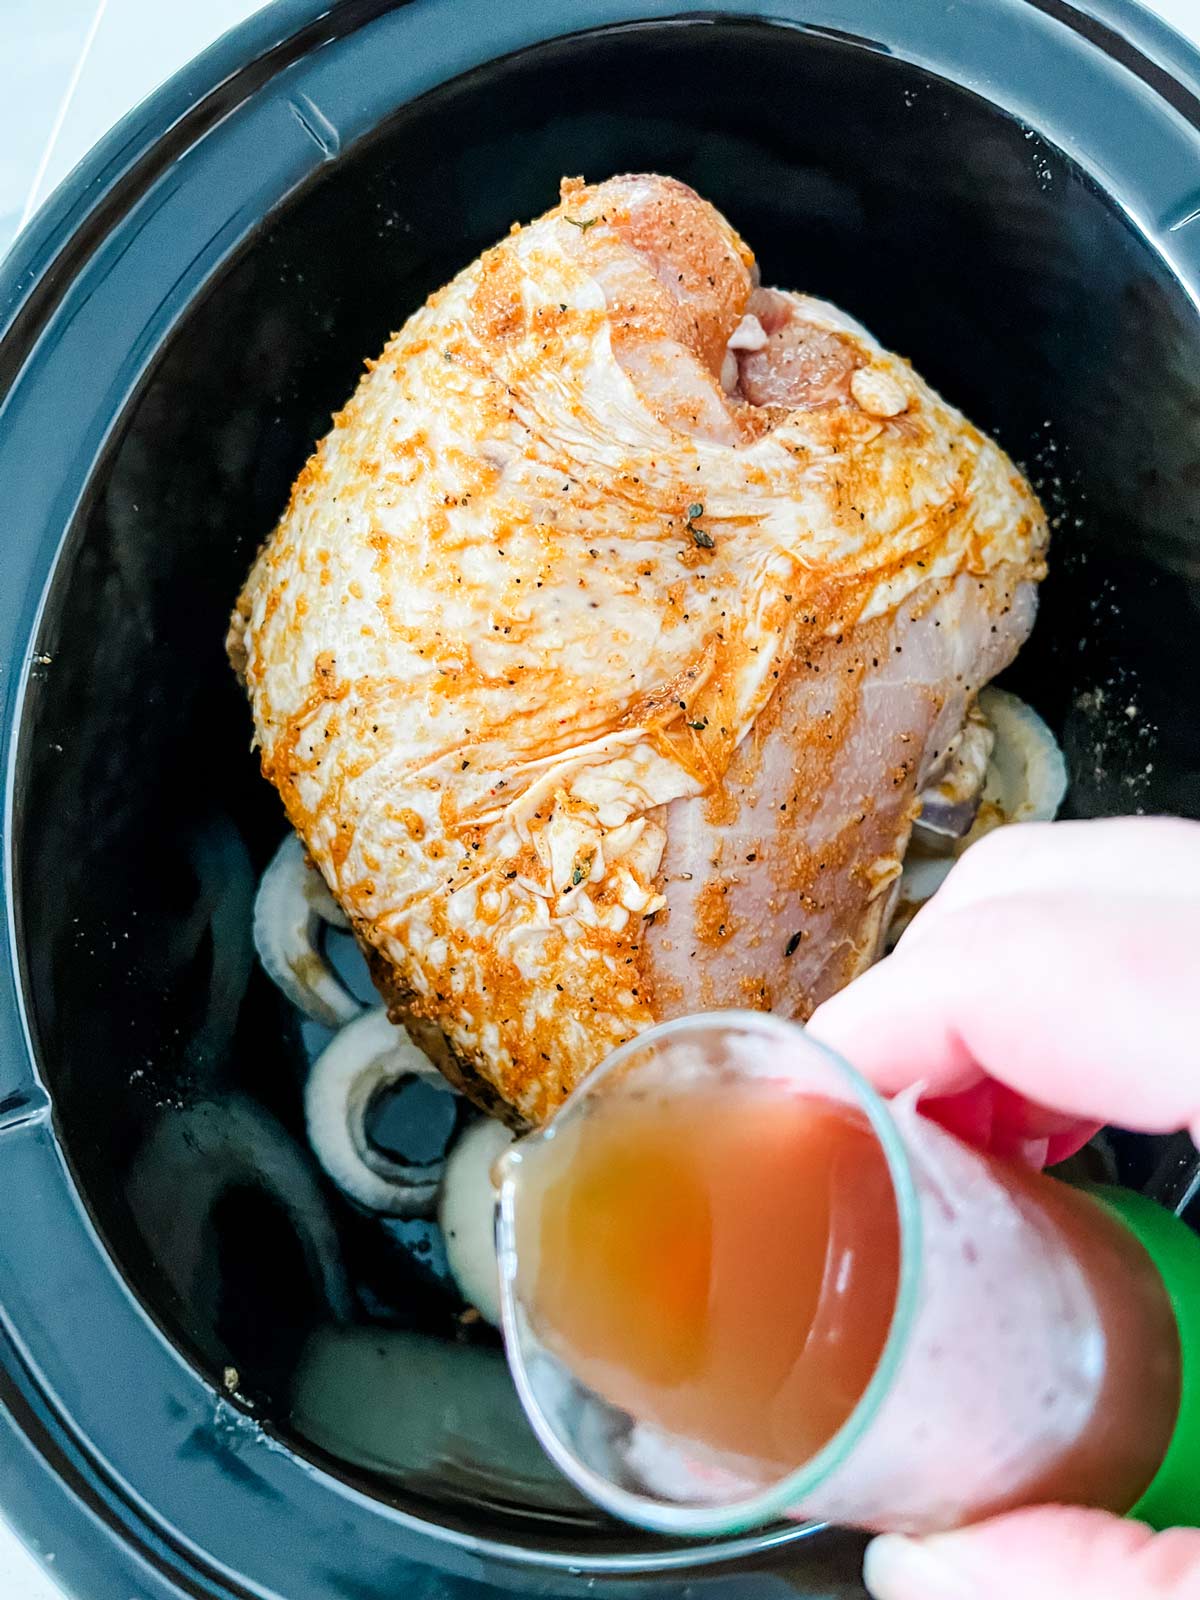 Broth being poured on a turkey breast in the slow cooker.